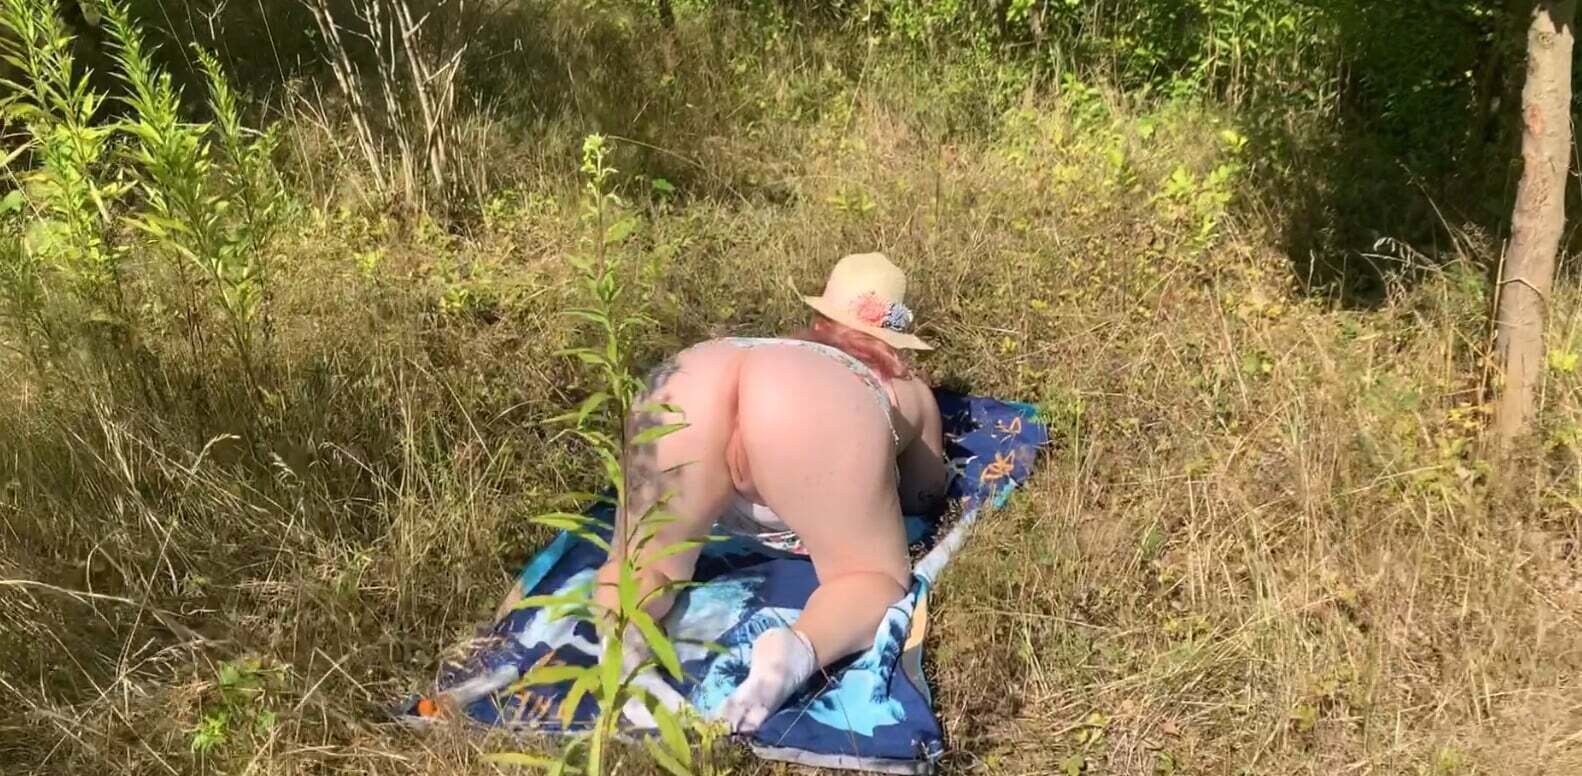 Watching a sunbathing girl with huge tits! She wants to fuck!